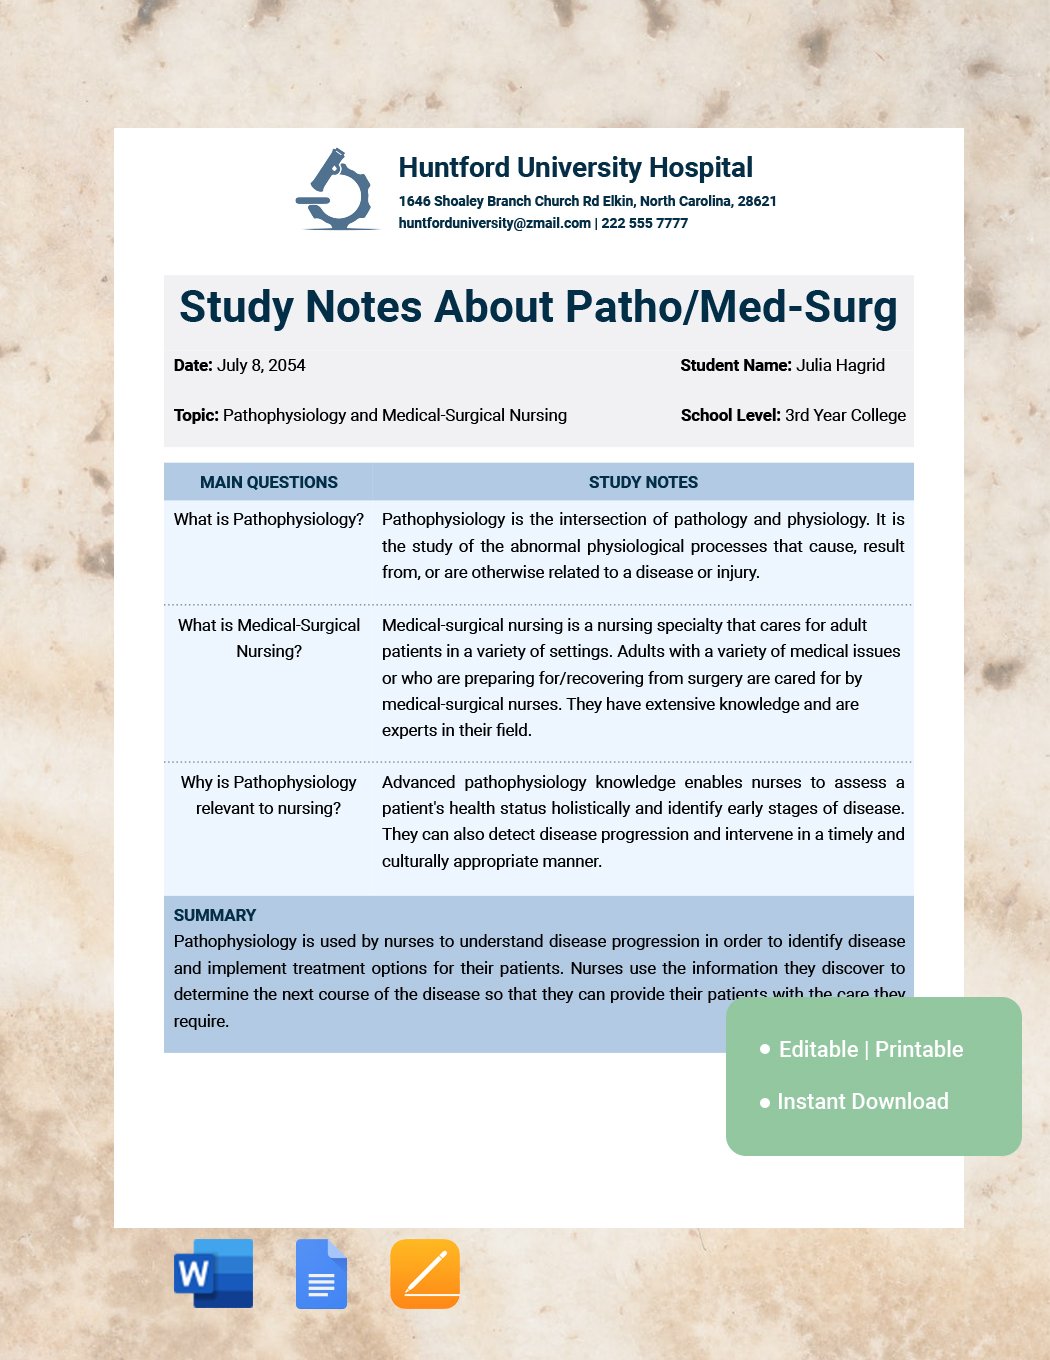 Patho/Med-Surg Note-taking Template